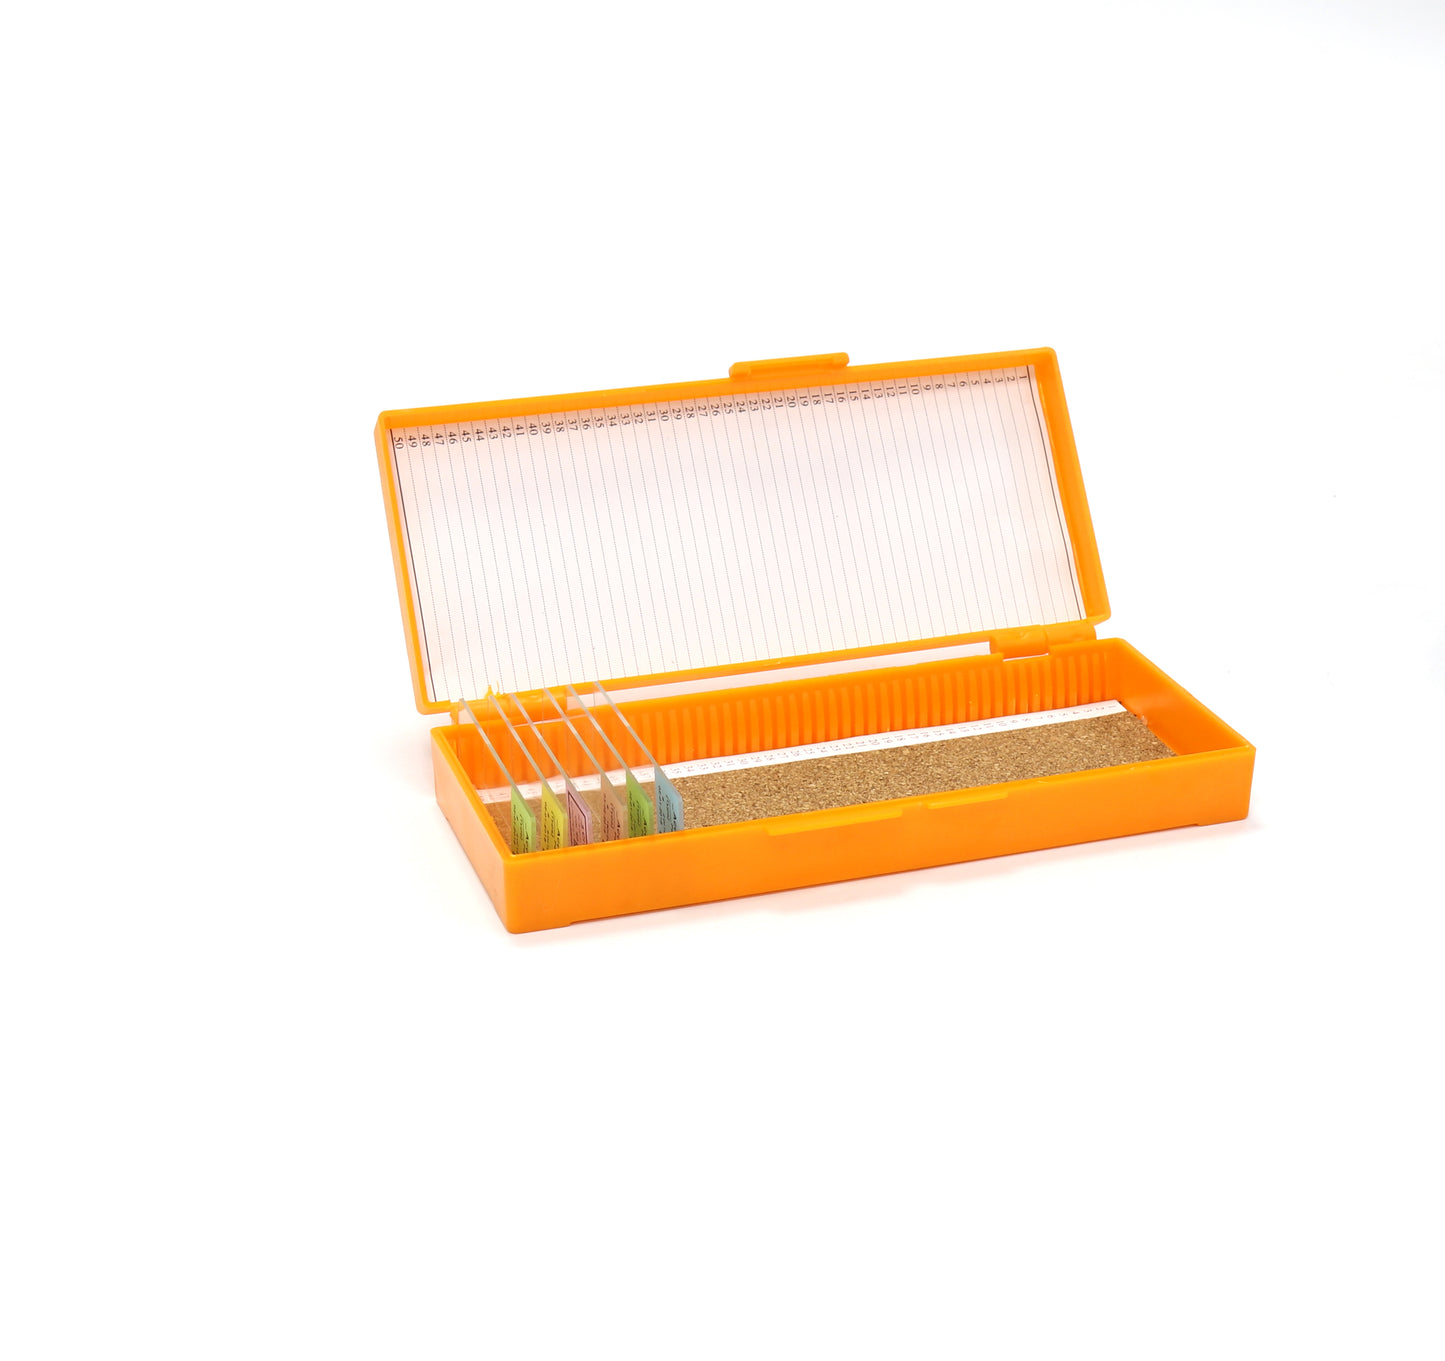 Slide Storage Boxes for 50 Pieces of 25.0x75.0mm (1"x3") Slides, Orange Color, ABS Material. With Cork Sheet on the Bottom and Index List Inside the Lid